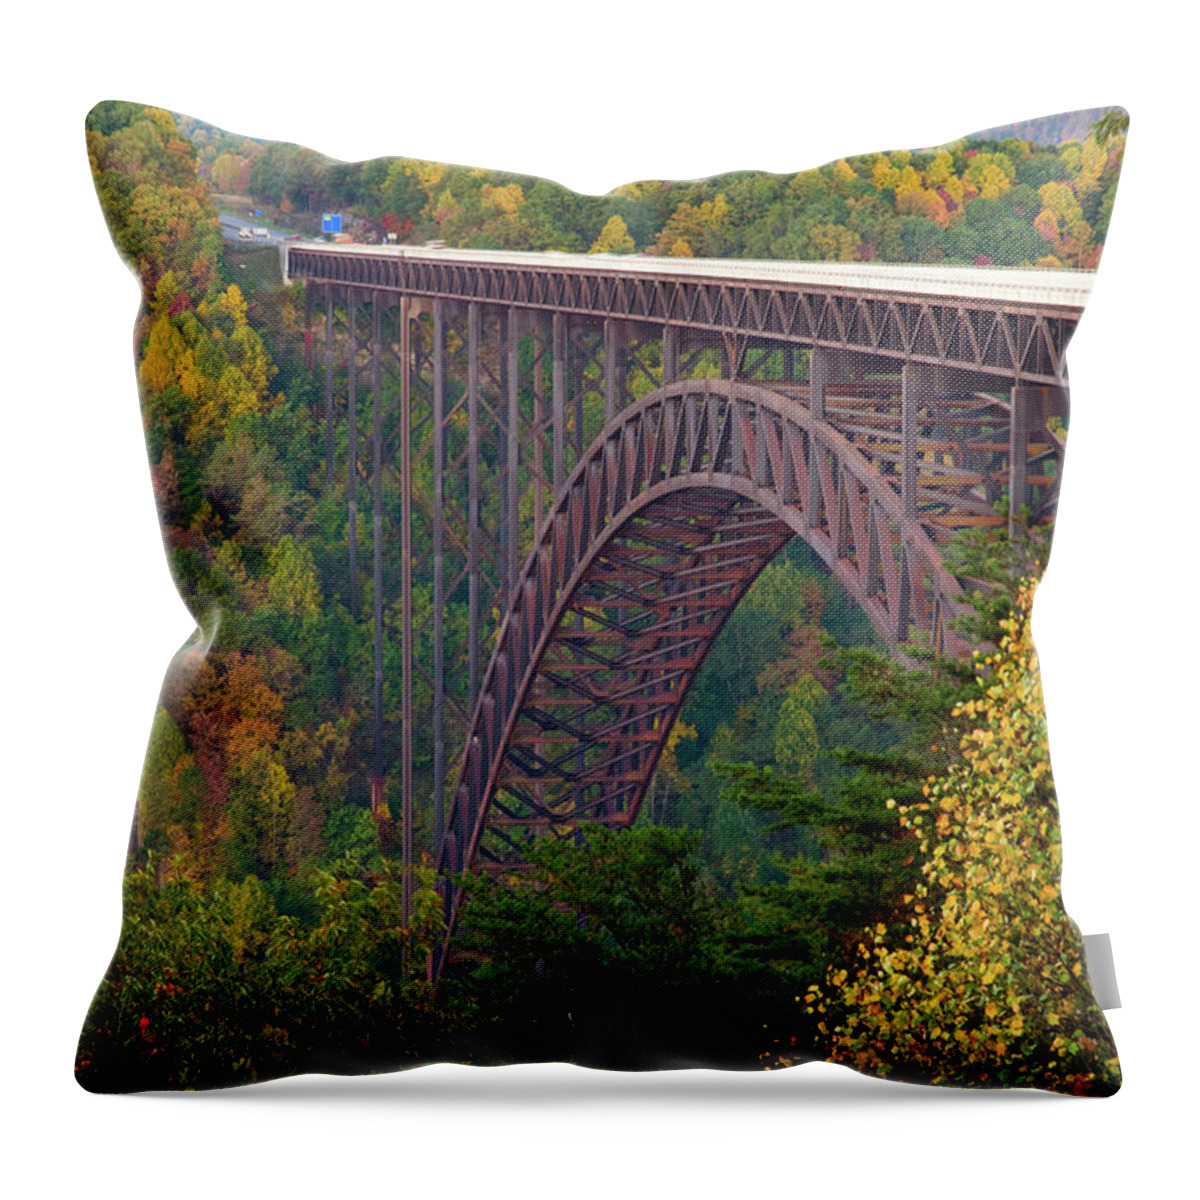 West Virginia Throw Pillow featuring the photograph New River Gorge Bridge by Steve Stuller